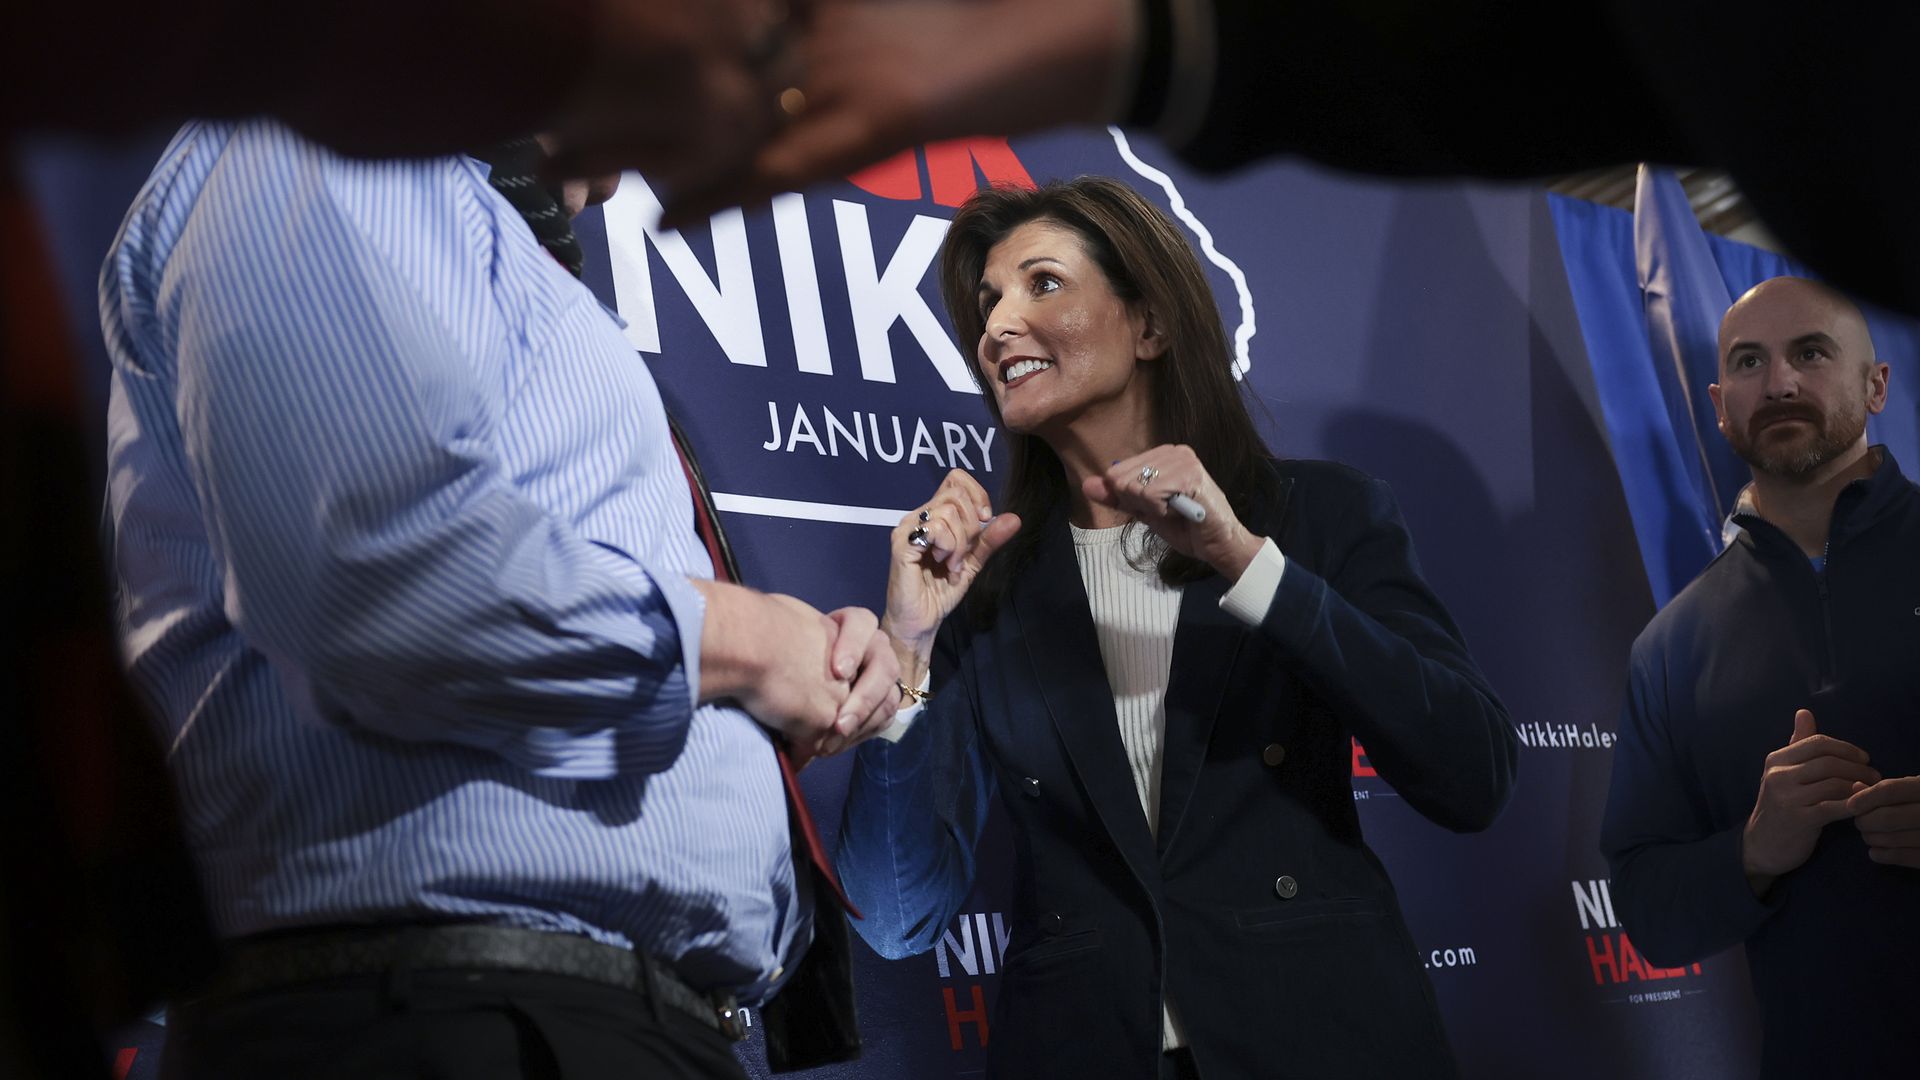 Nikki Haley, in a blue blazer and white blouse, talks with a supporter on a podium and in front of a banner.